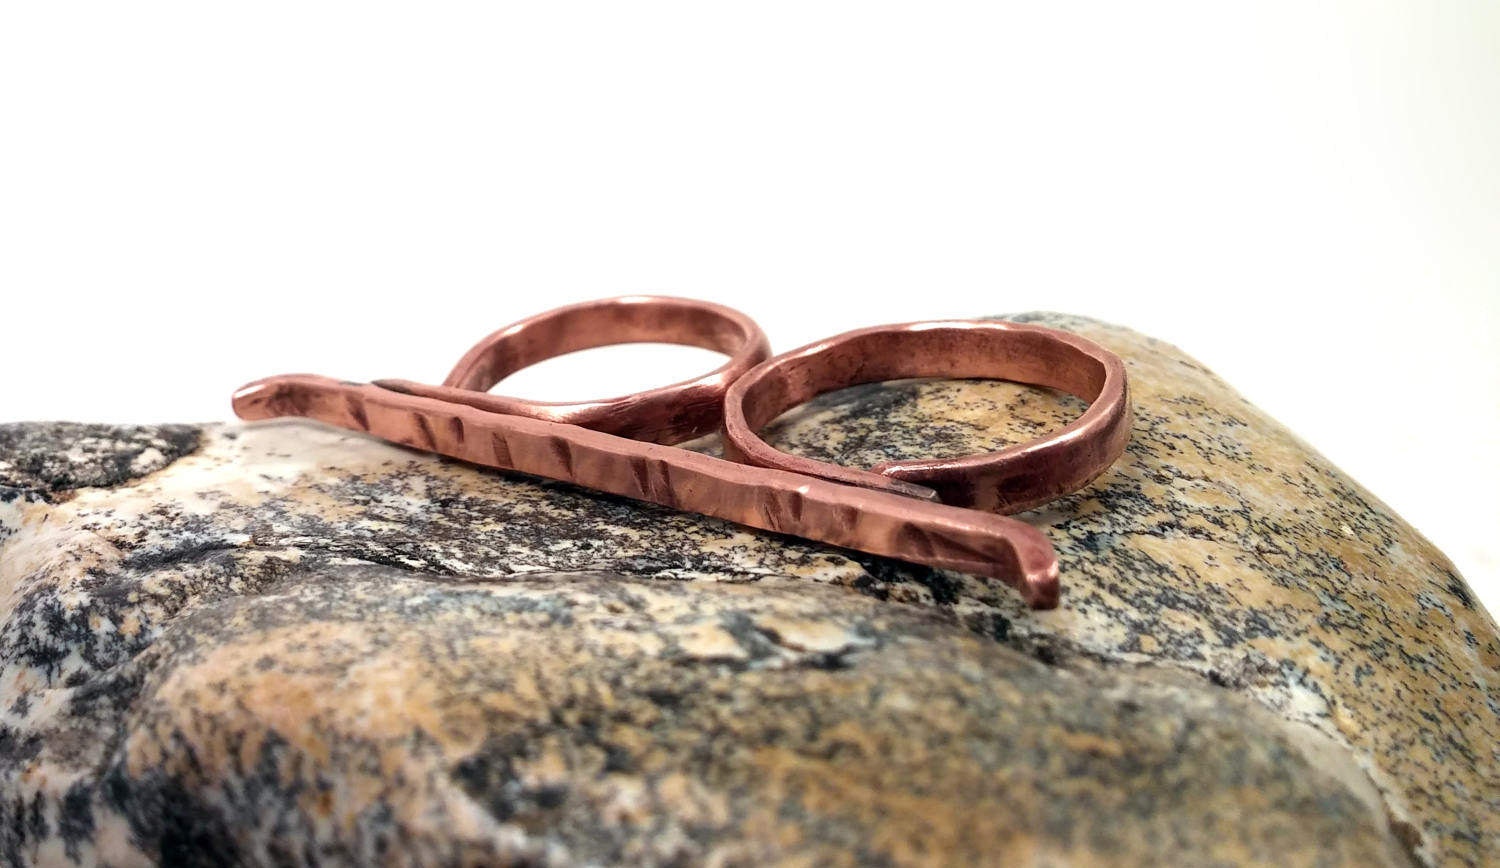 Women's Copper Two Finger Ring/Adjustable Band Hammered 3mm Birch Textured Gift For Her Anniversary Ideas Minimalist Jewelry